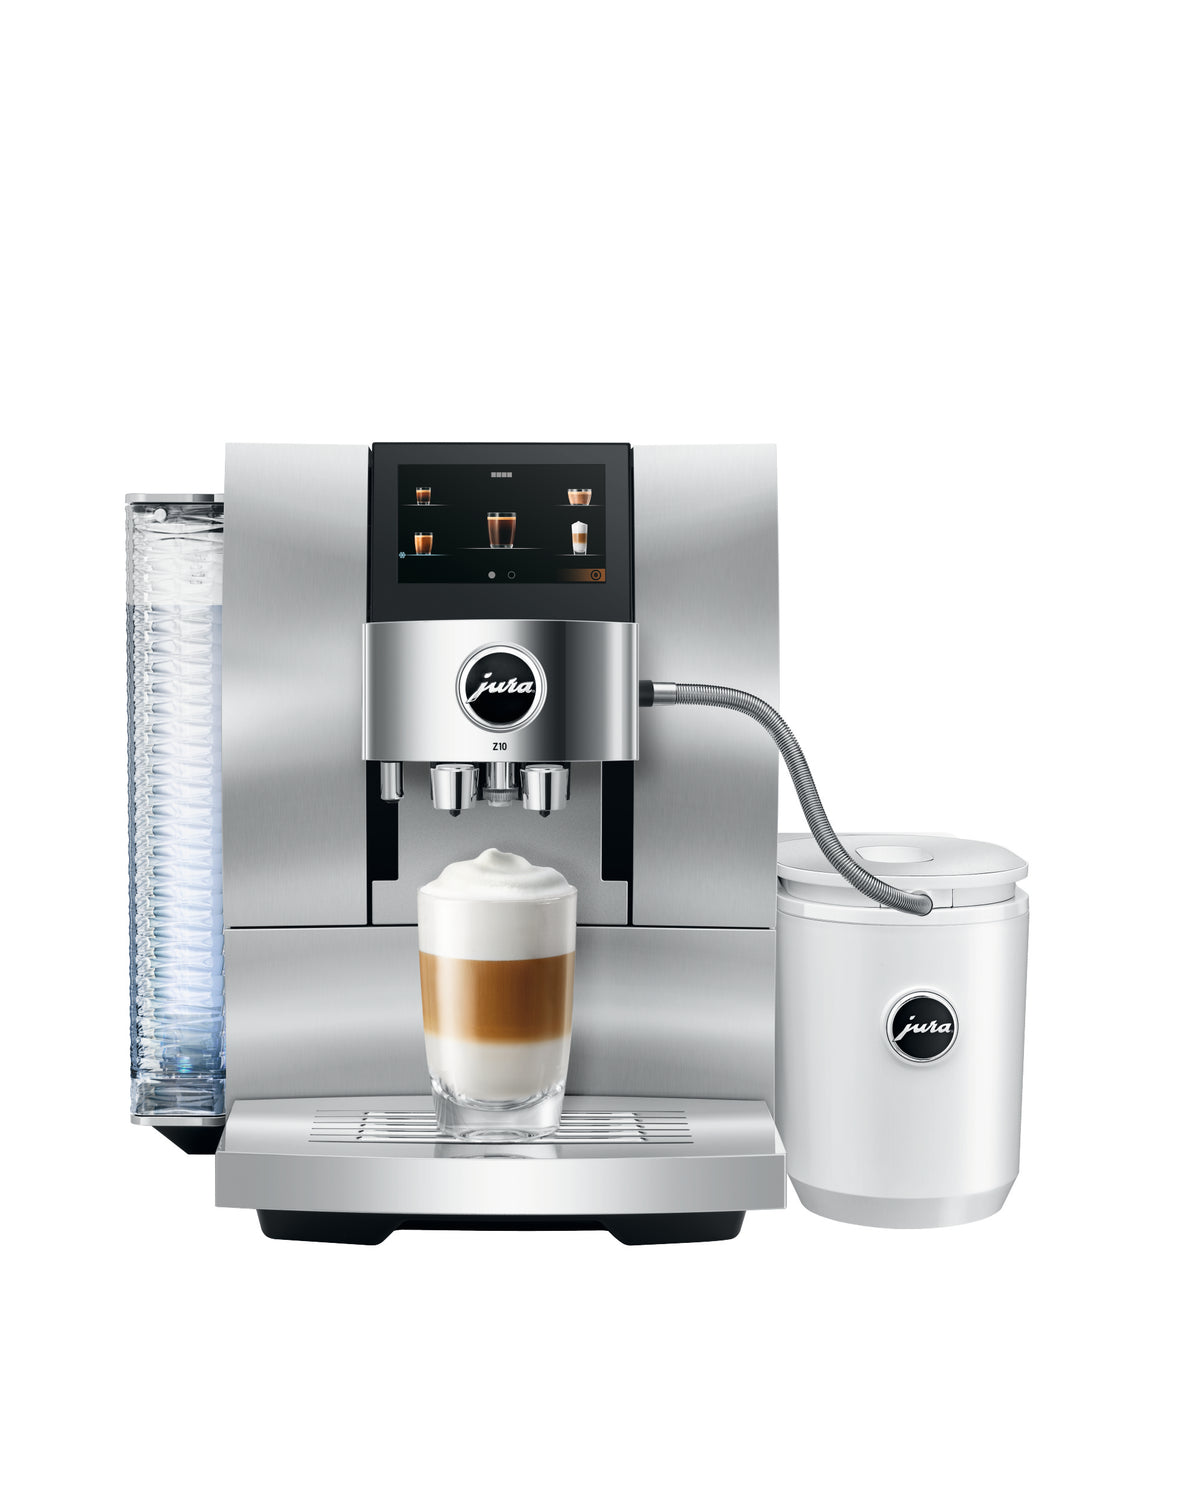 Z10 Fully Automatic Coffee Machine in Aluminum White